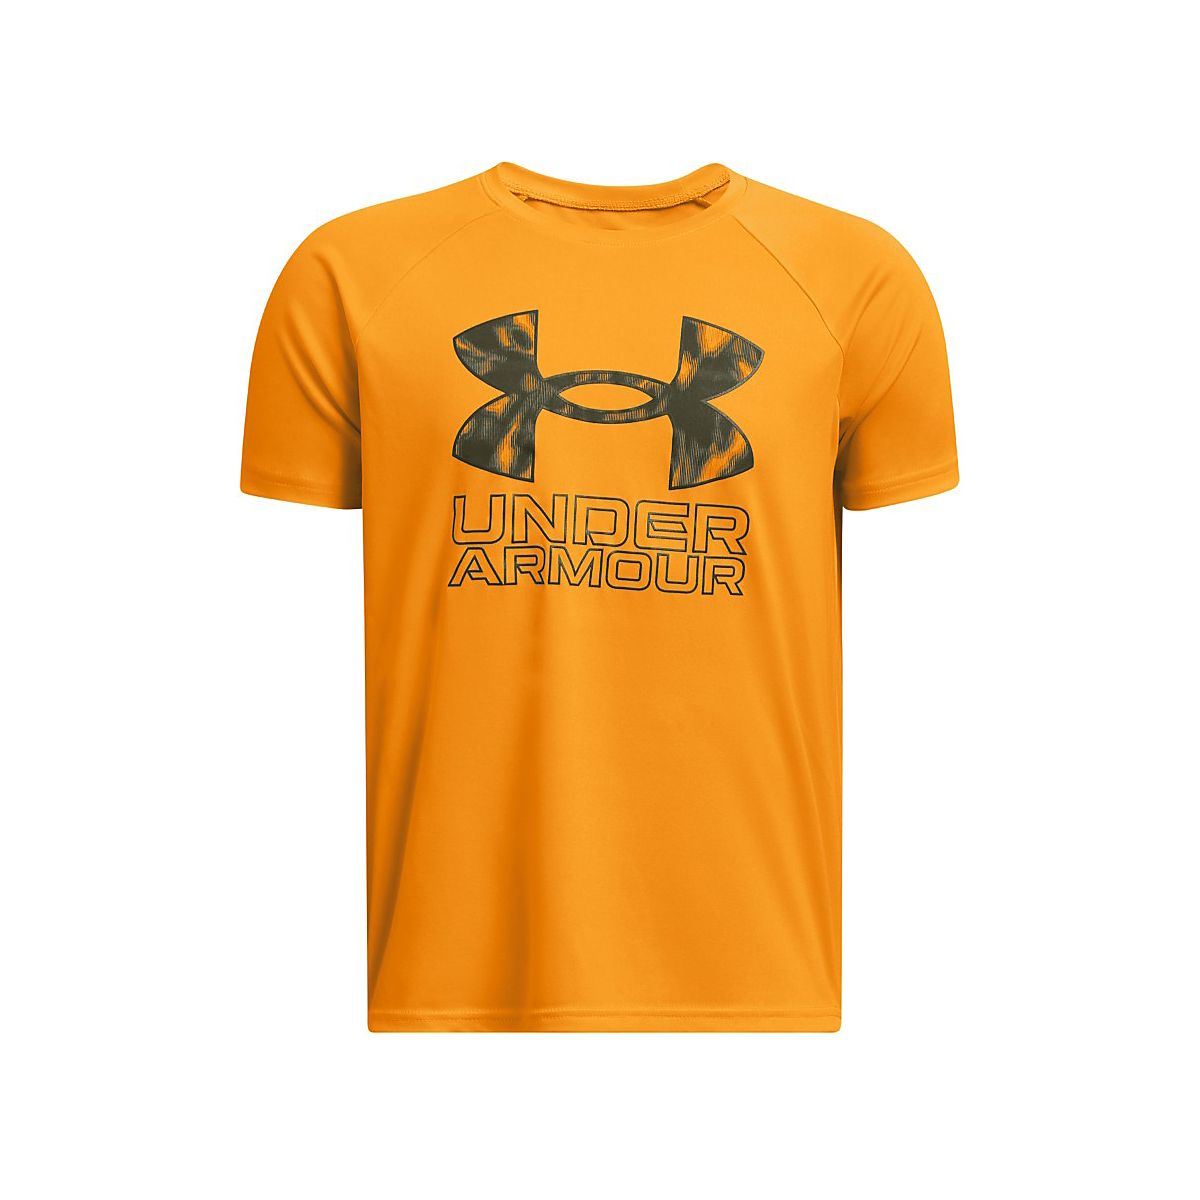 Under Armour Boys' Sea Expo T-Shirt - Brown, Ymd